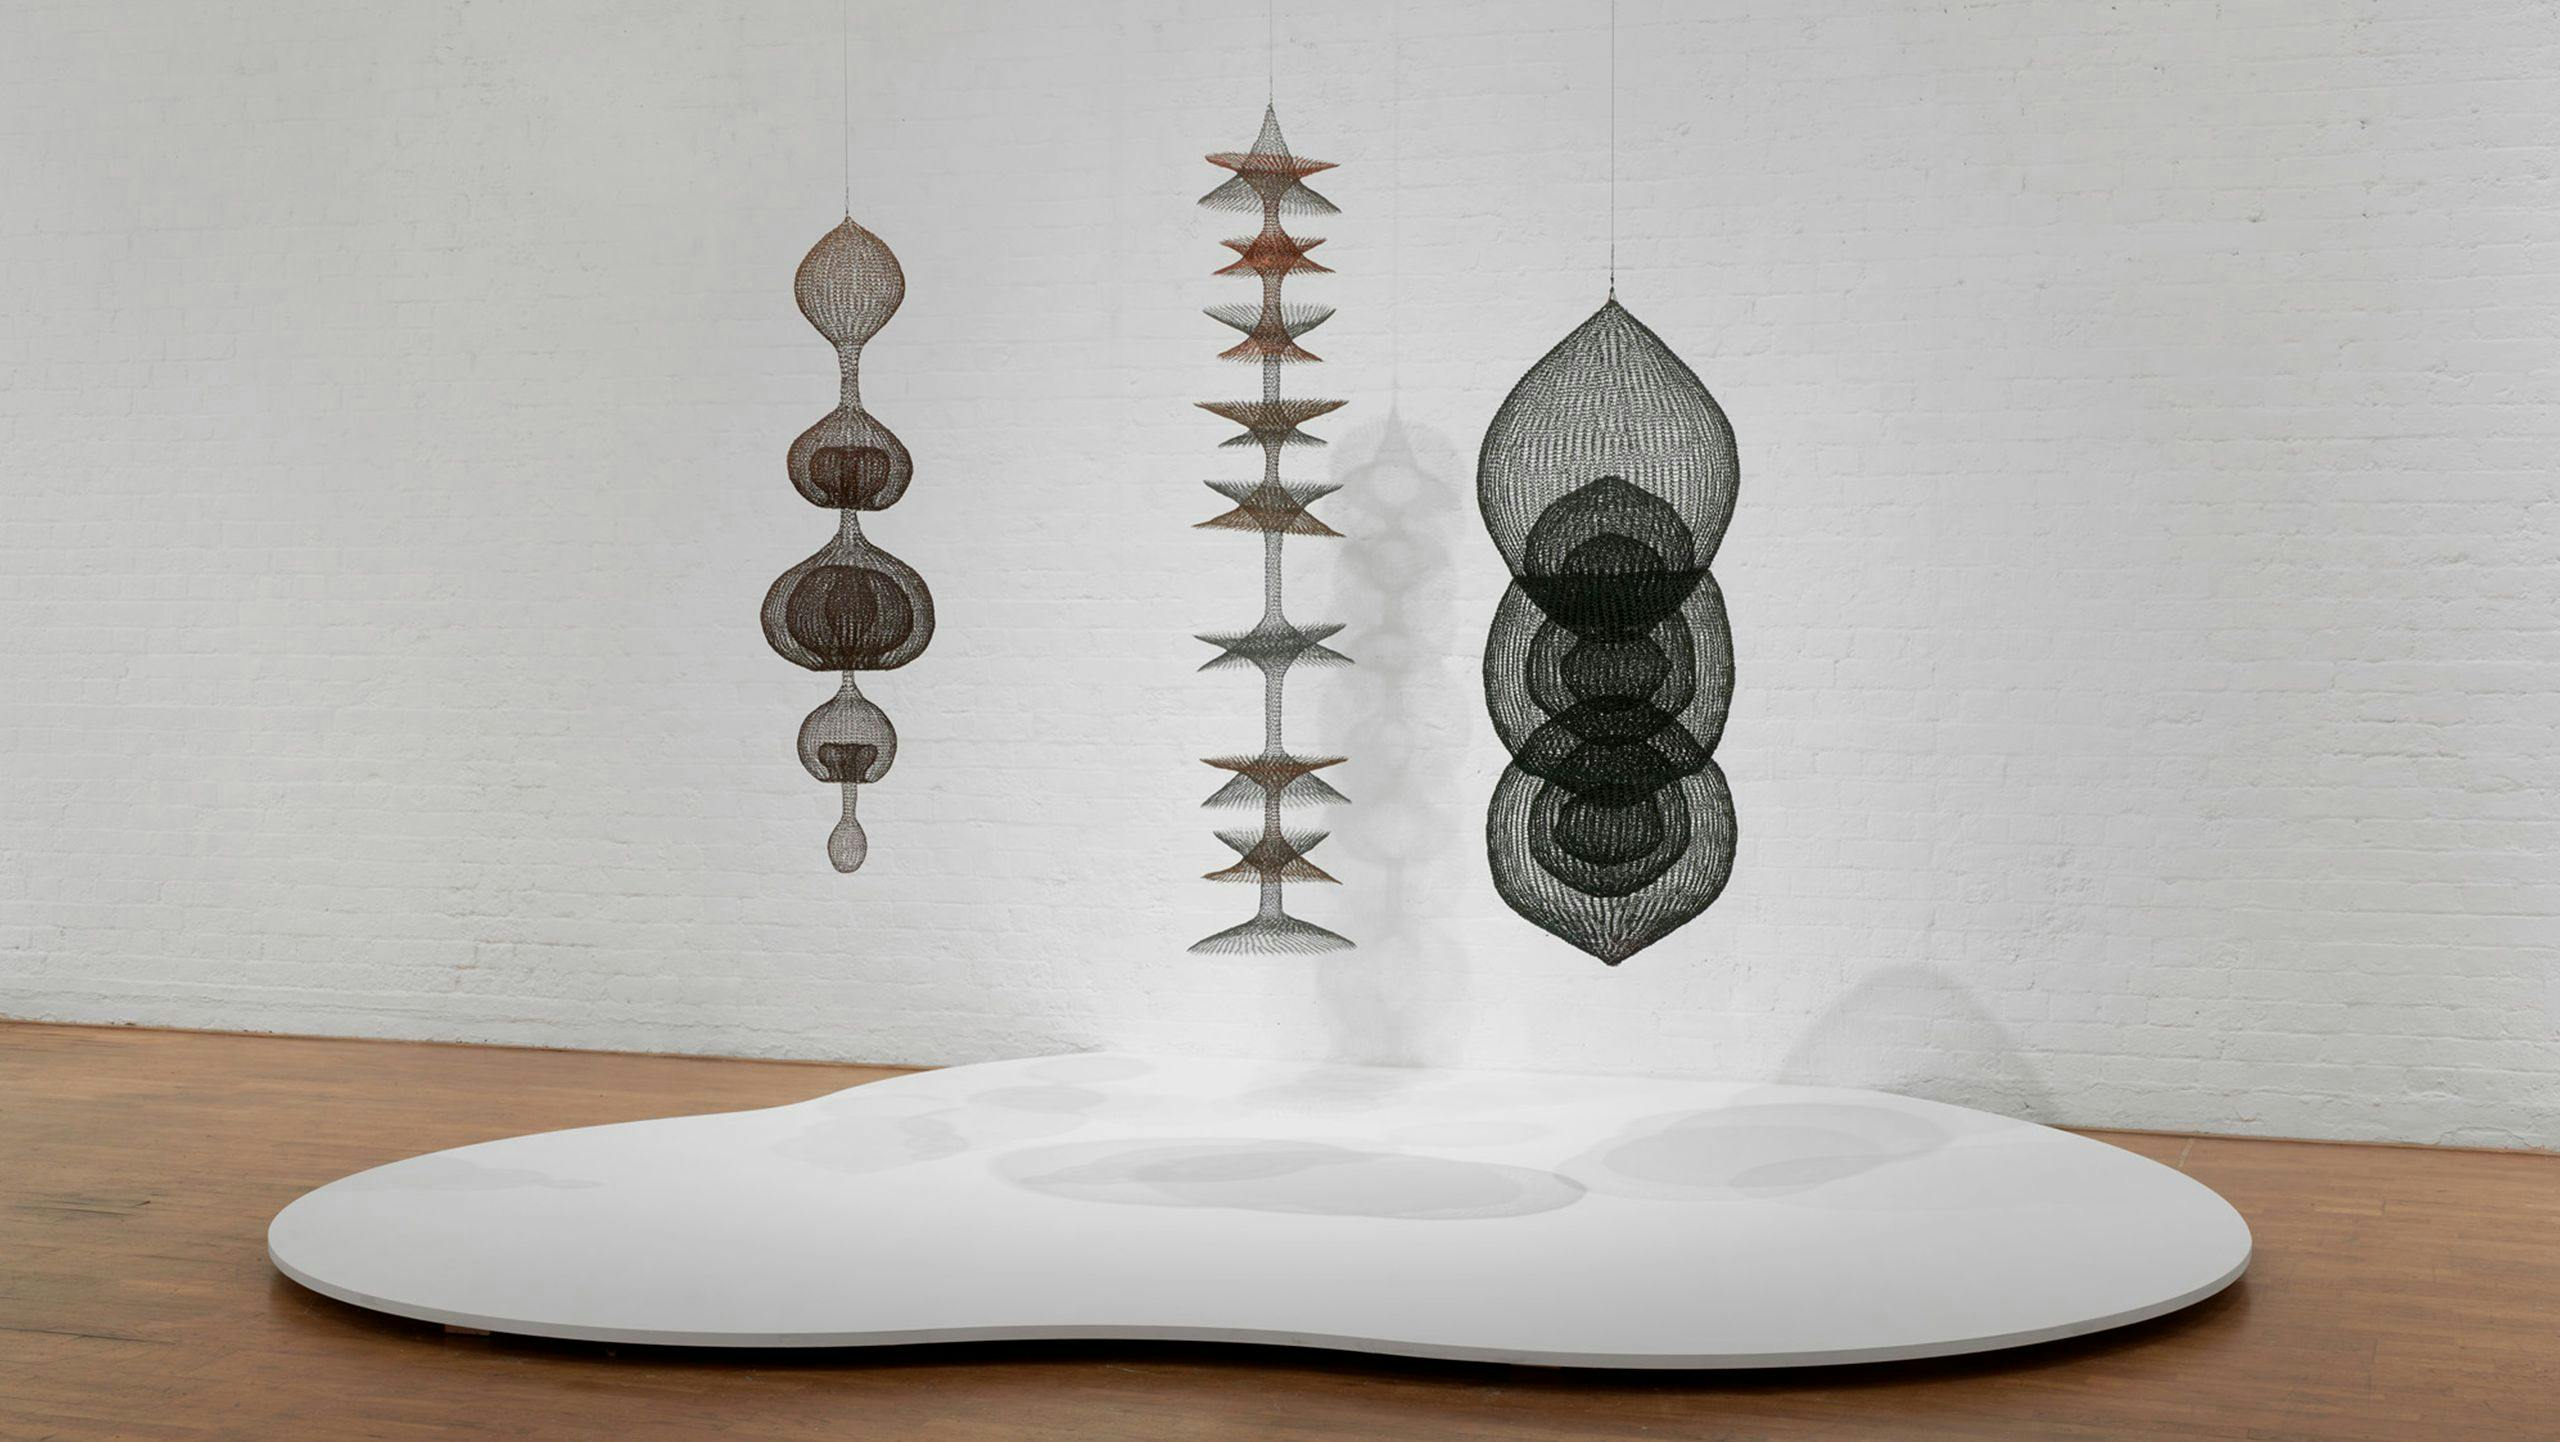 Installation view of the exhibition Ruth Asawa: Citizen of the Universe at Modern Art Oxford, dated 2022.